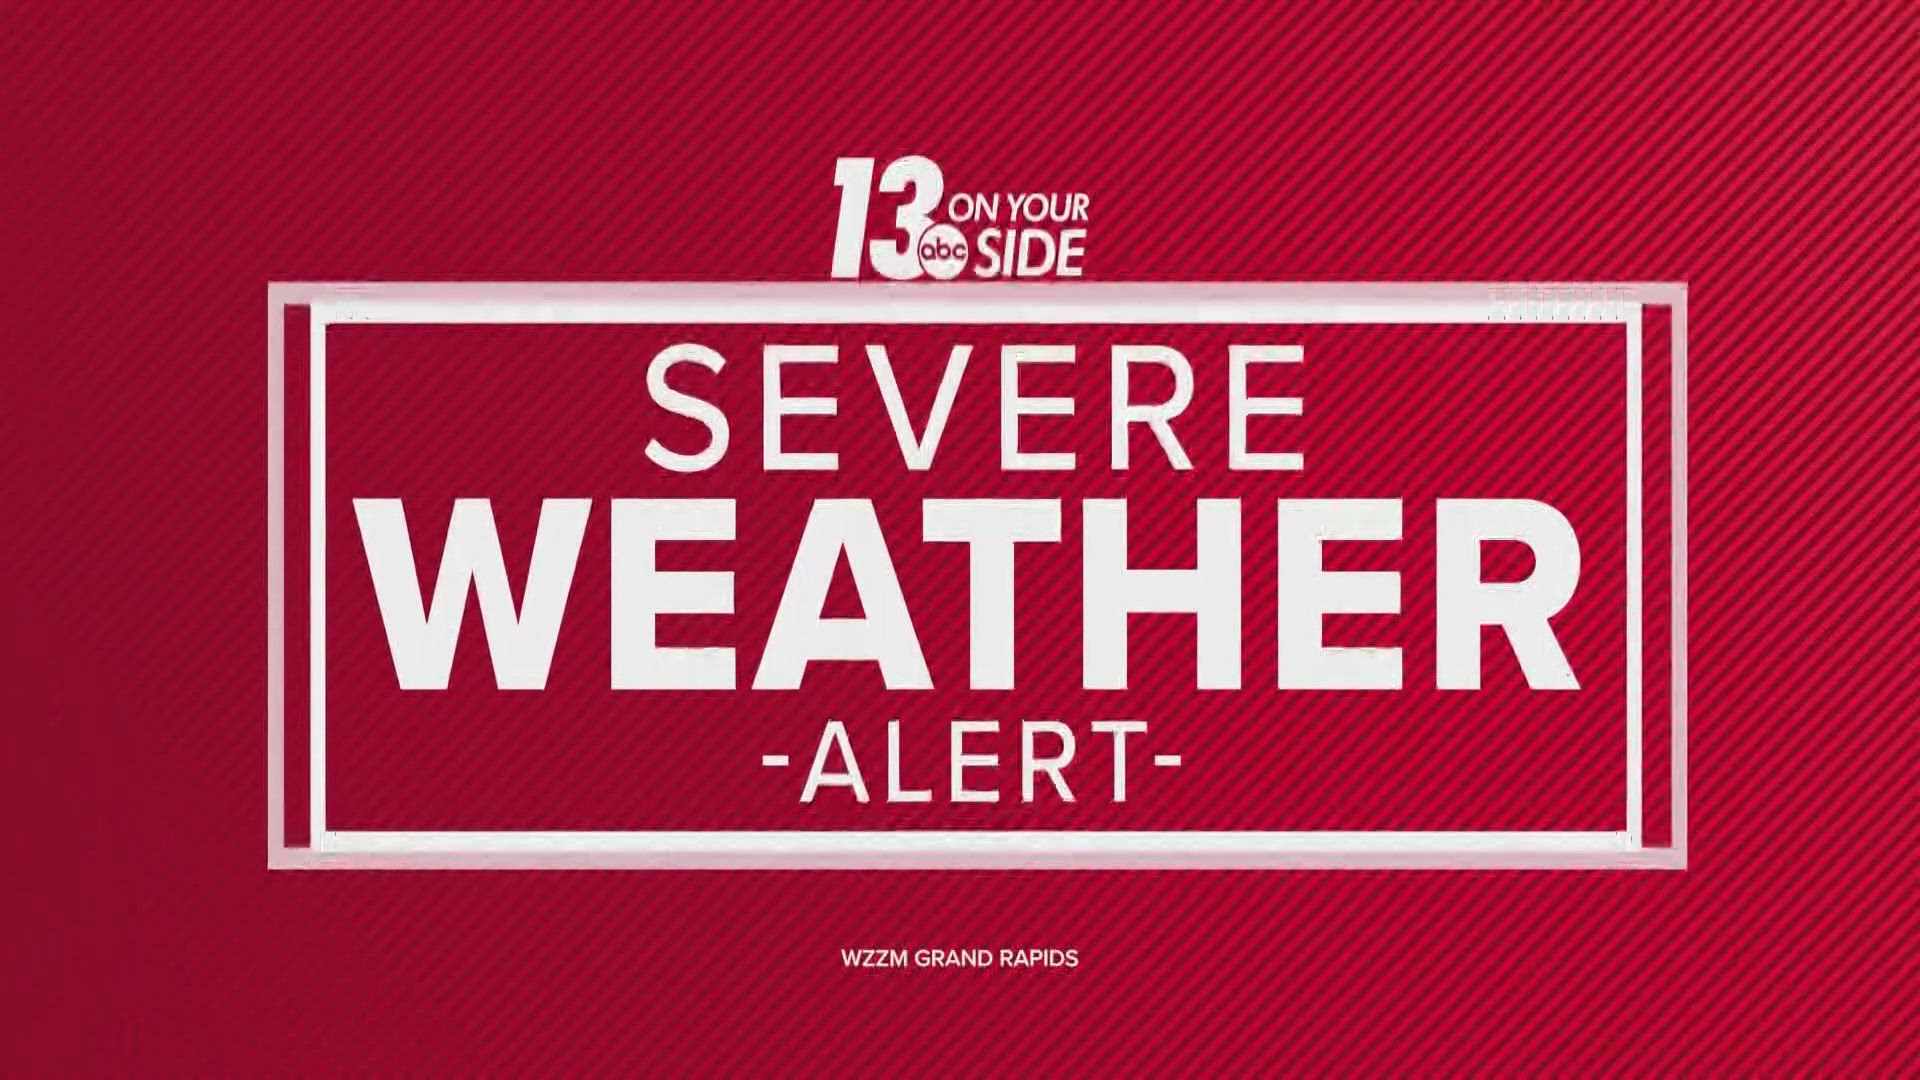 Stay weather aware with 13 ON YOUR SIDE.